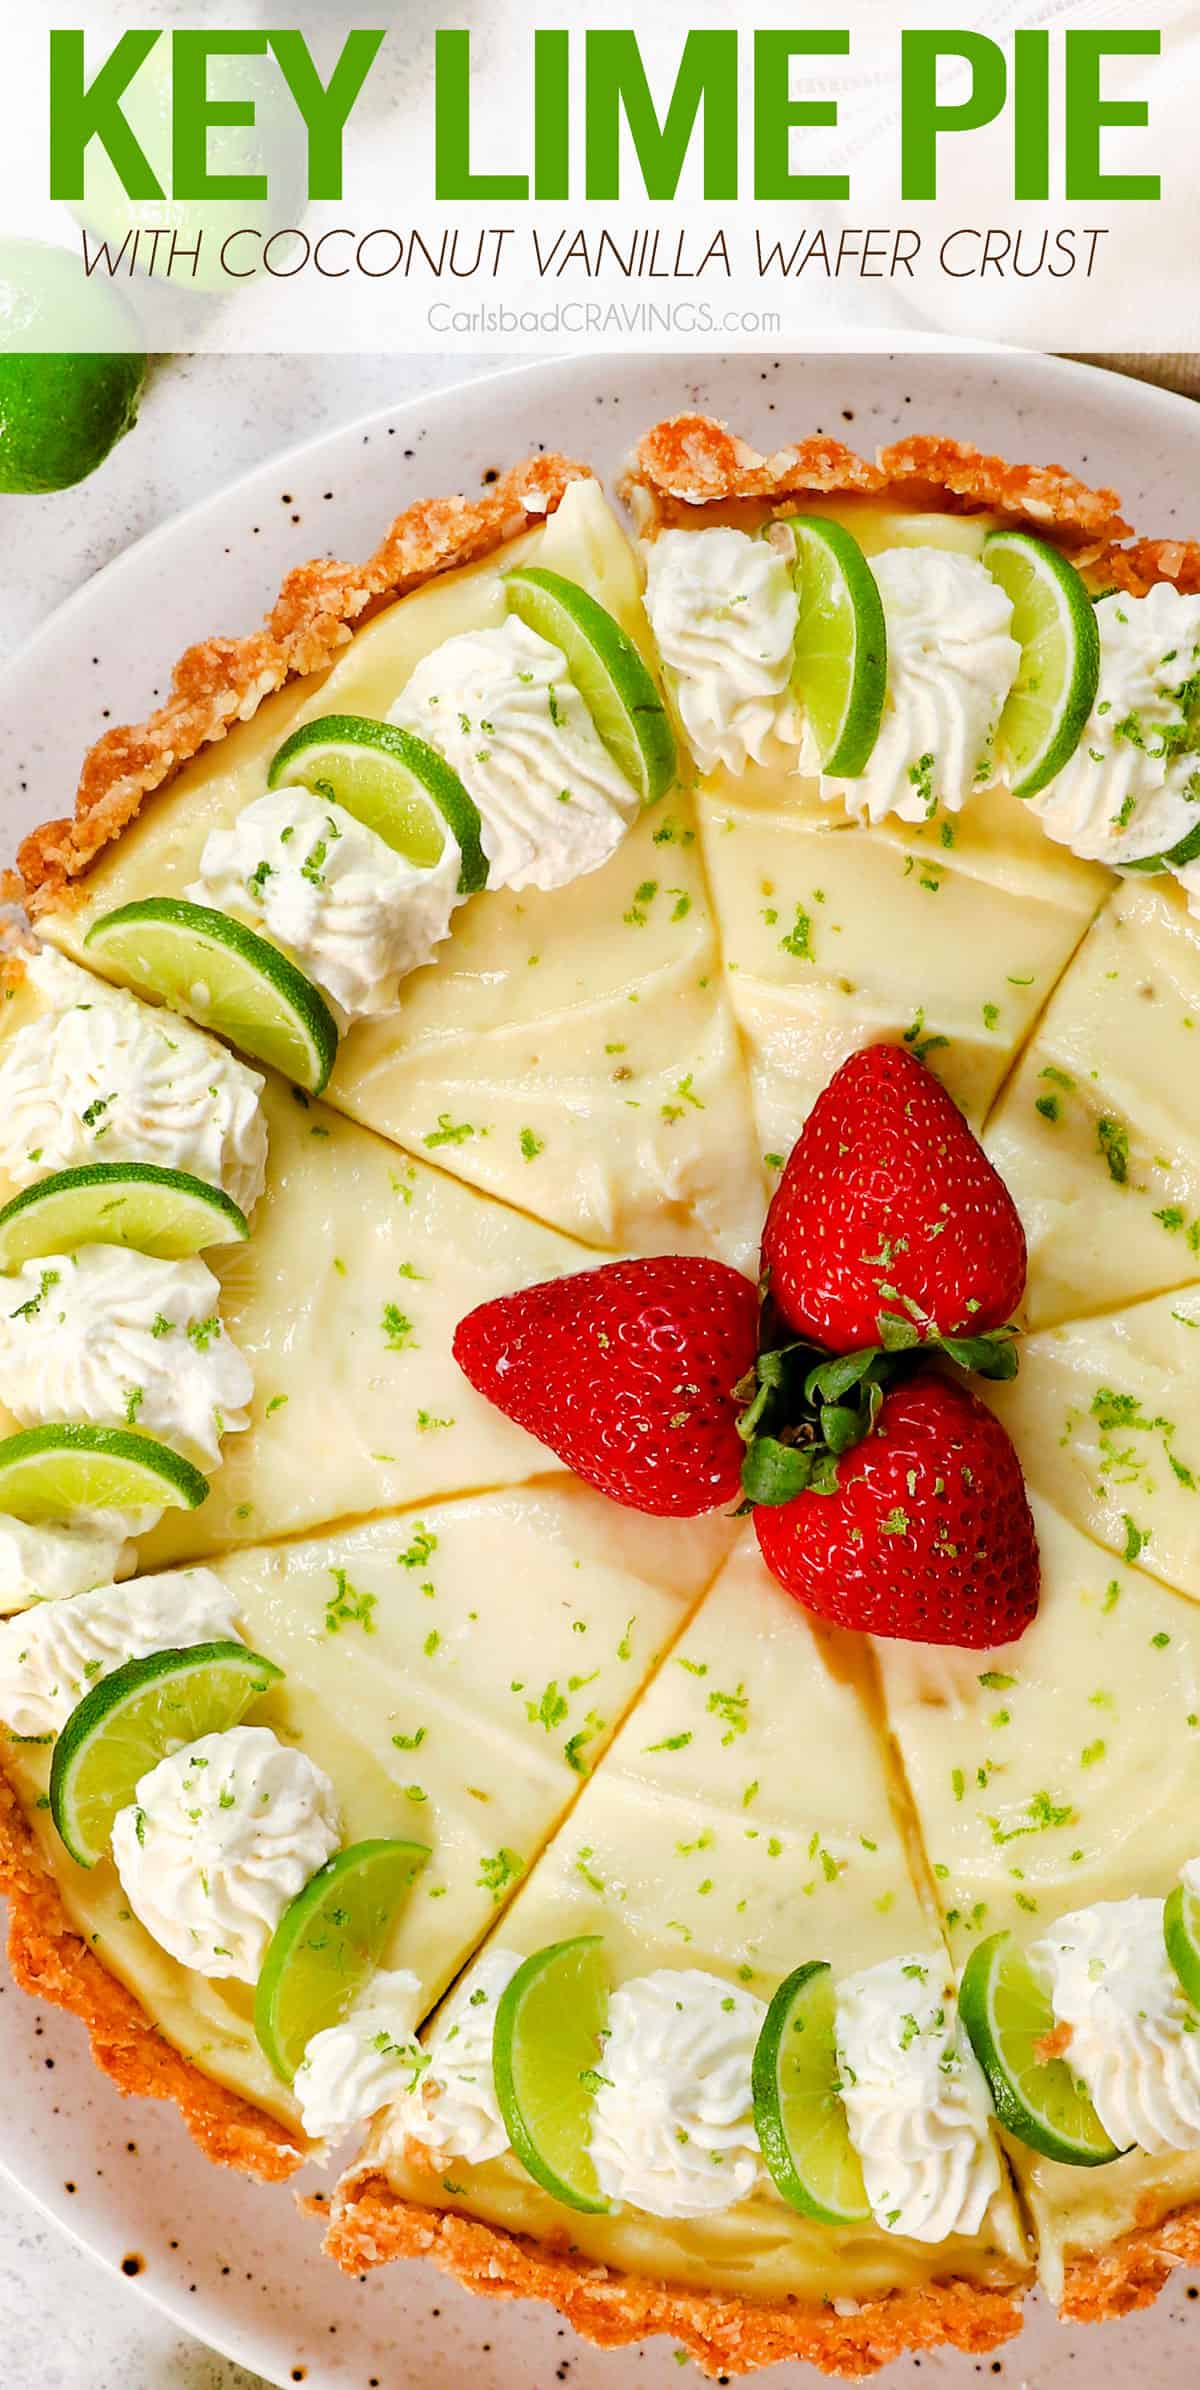 top view of key lime pie garnished with lime slices and whipped cream